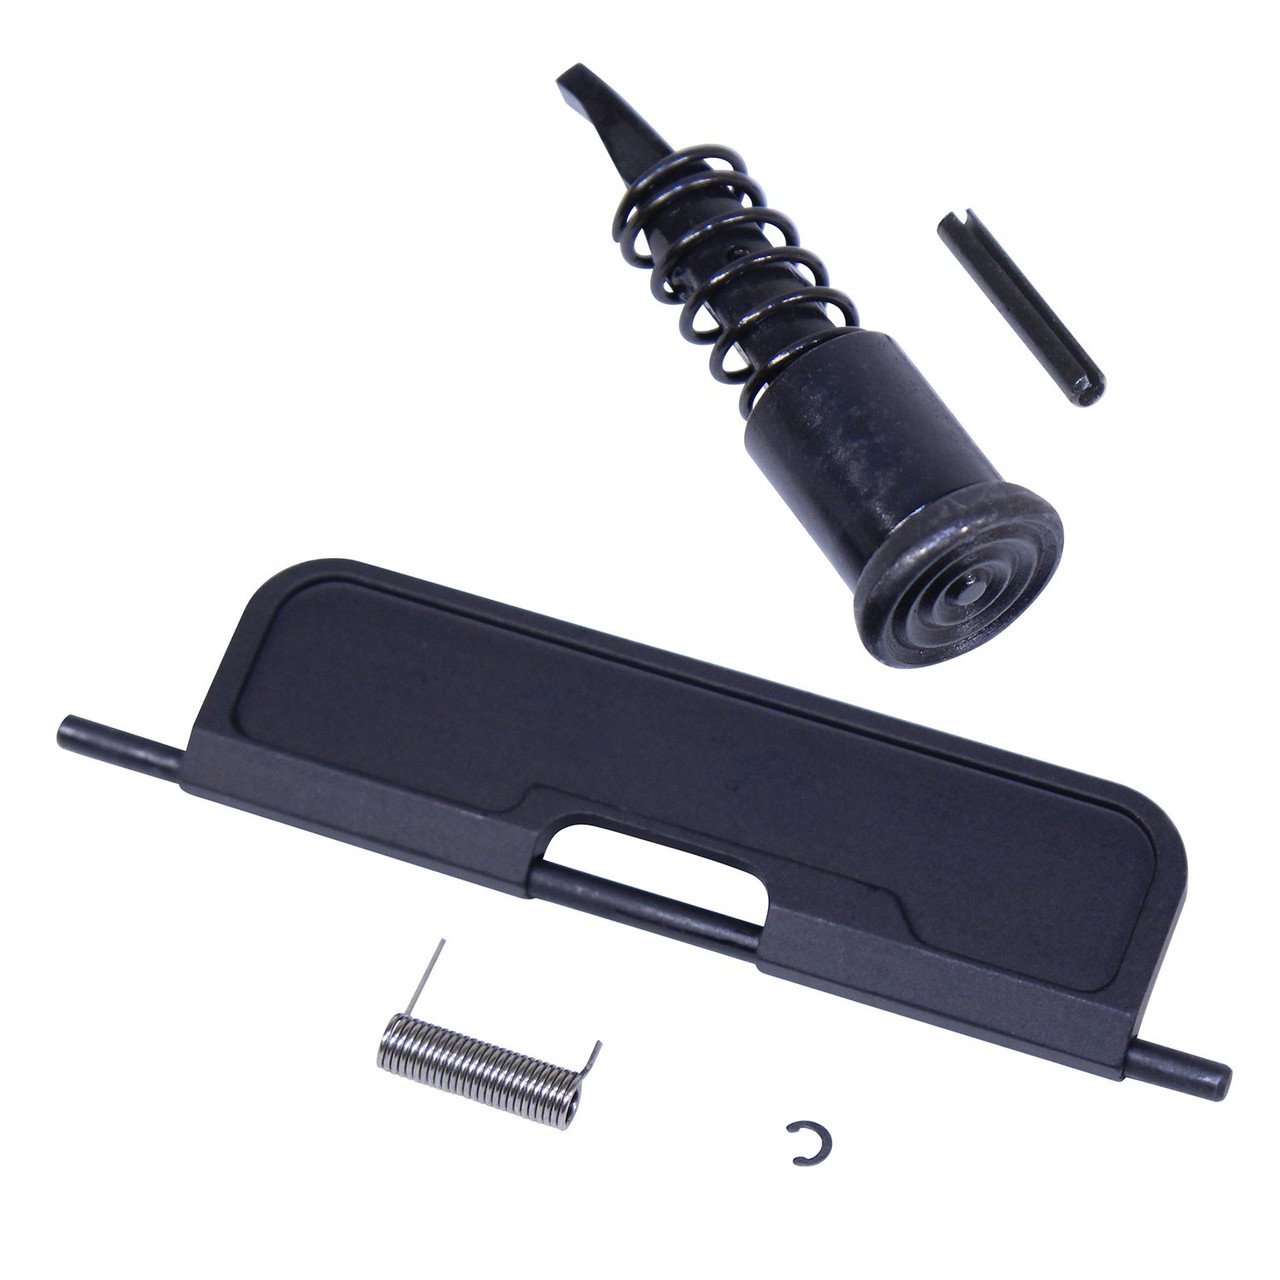 Guntec USA 223UPPER-CKIT-G3 AR-15 Upper Completion Kit With Gen 3 Dust Cover (Anodized Black)